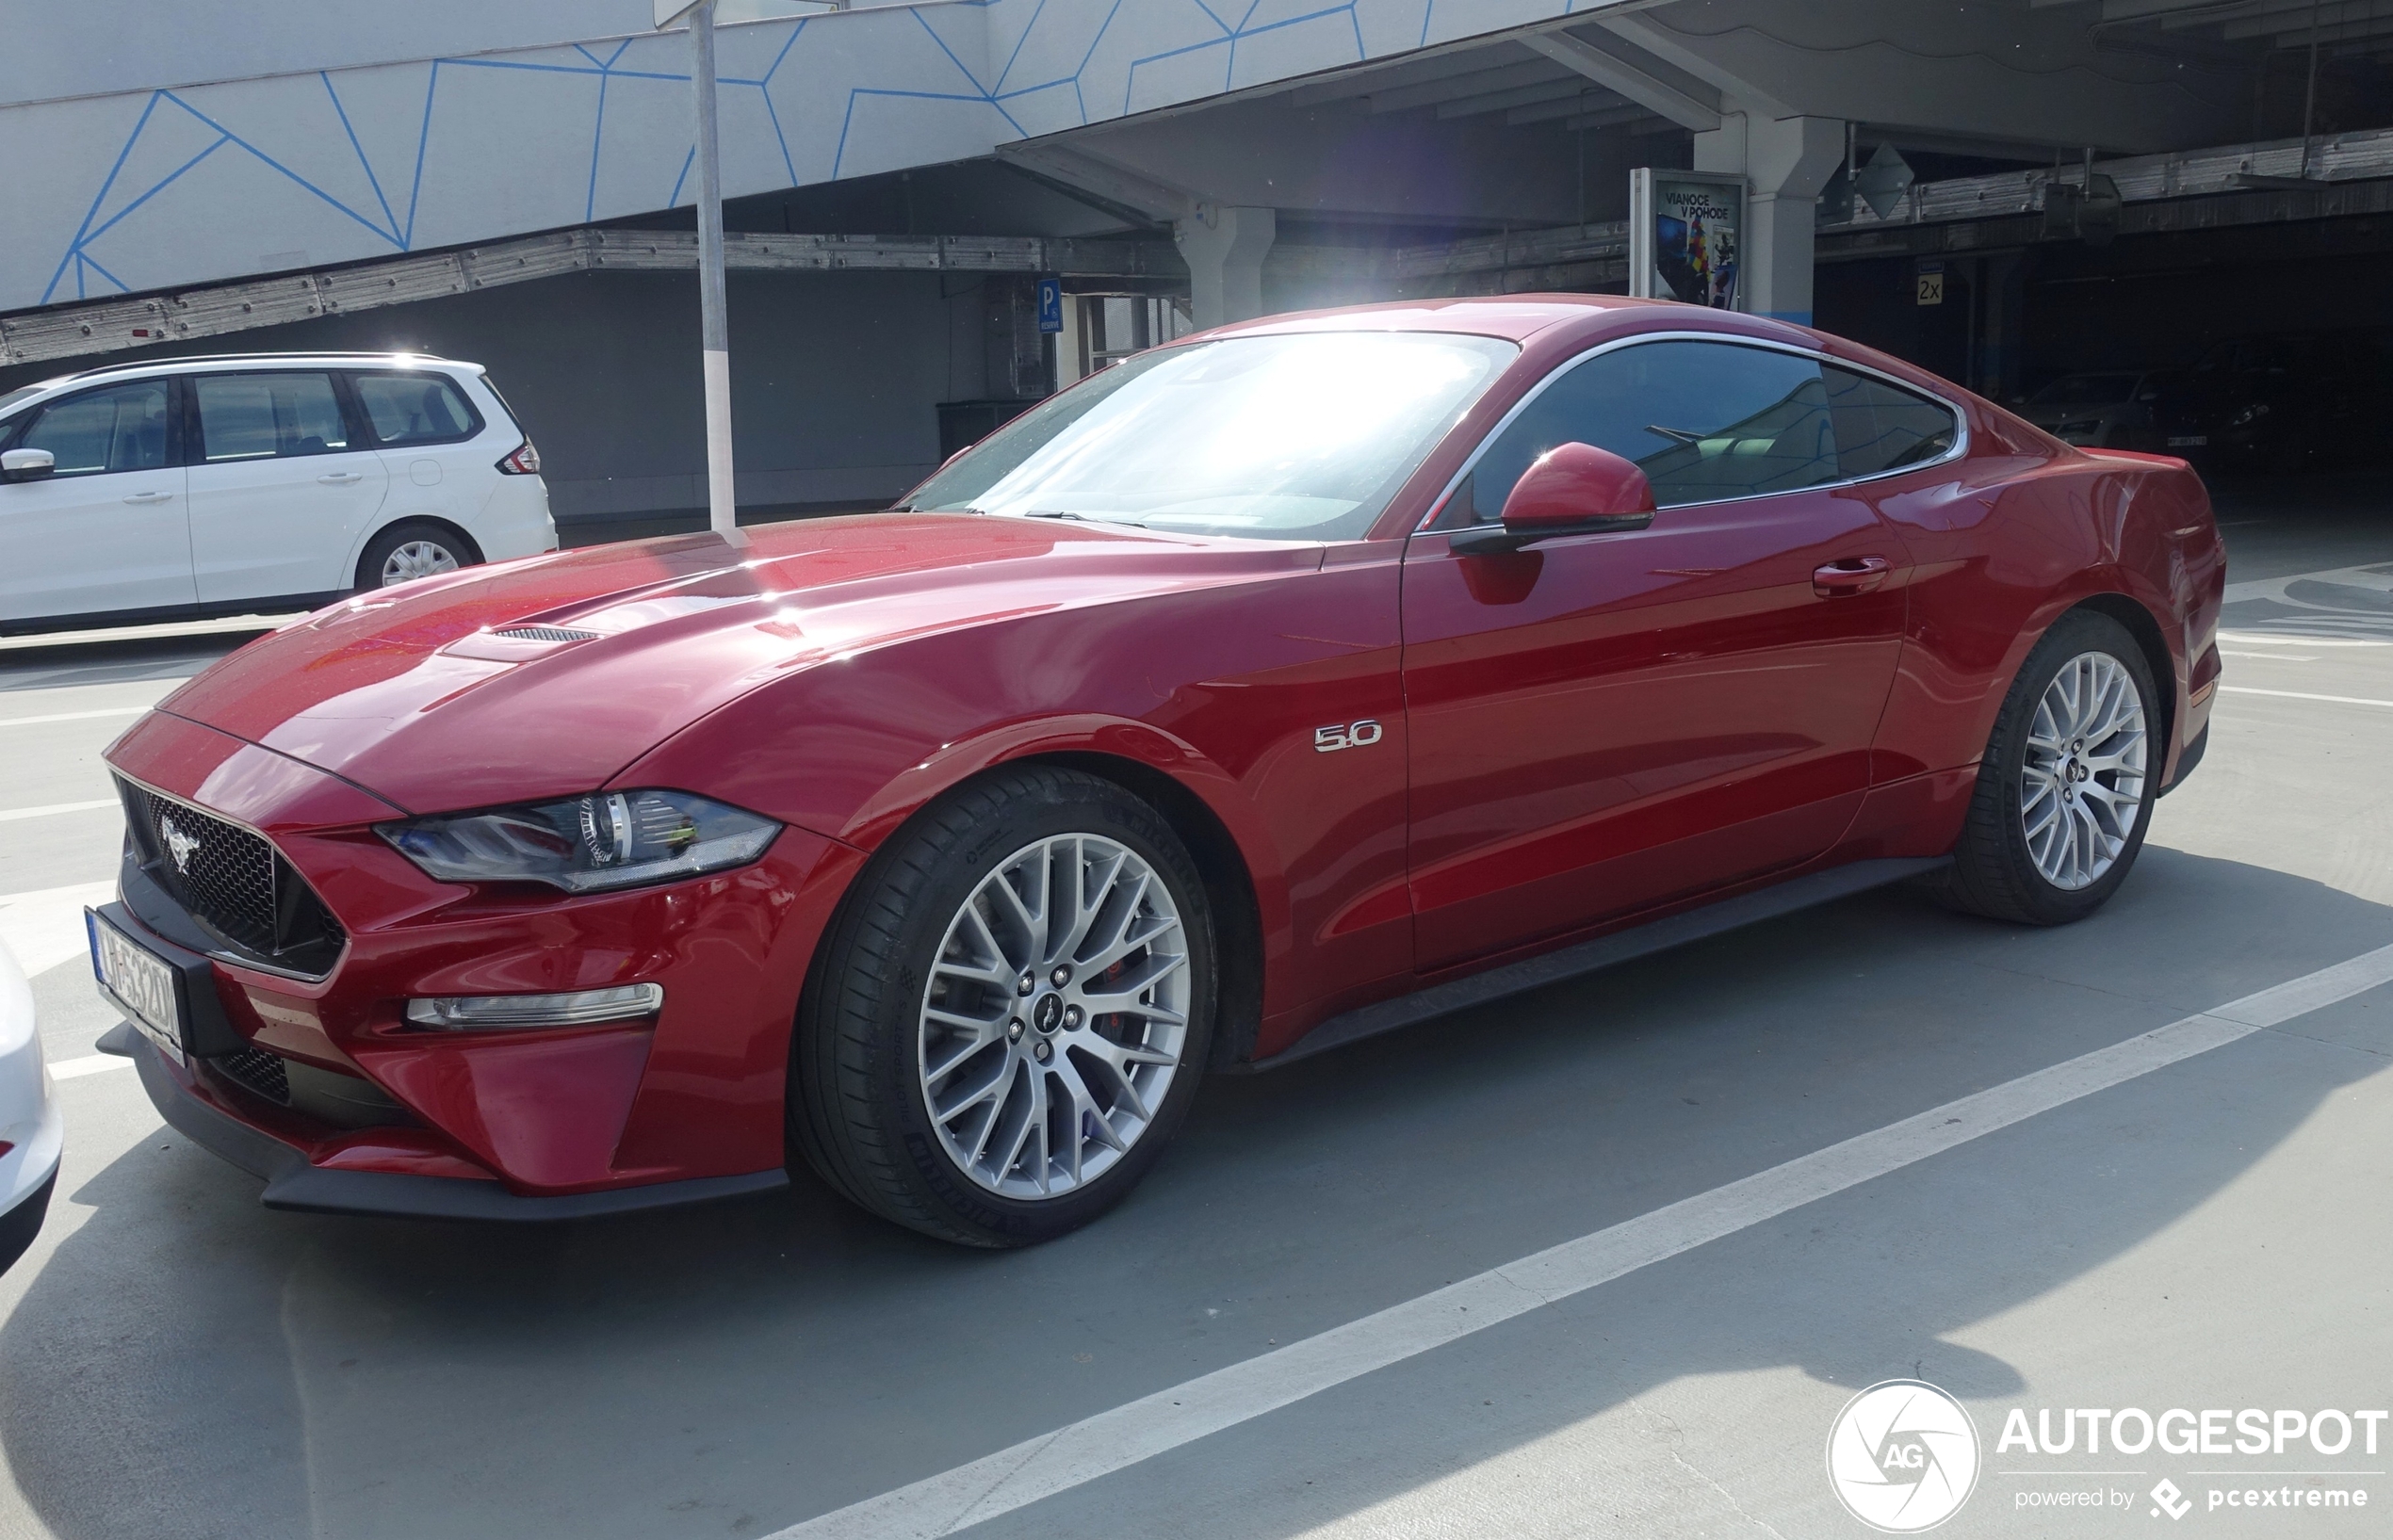 FORD MUSTANG GT 2018 ROUGE